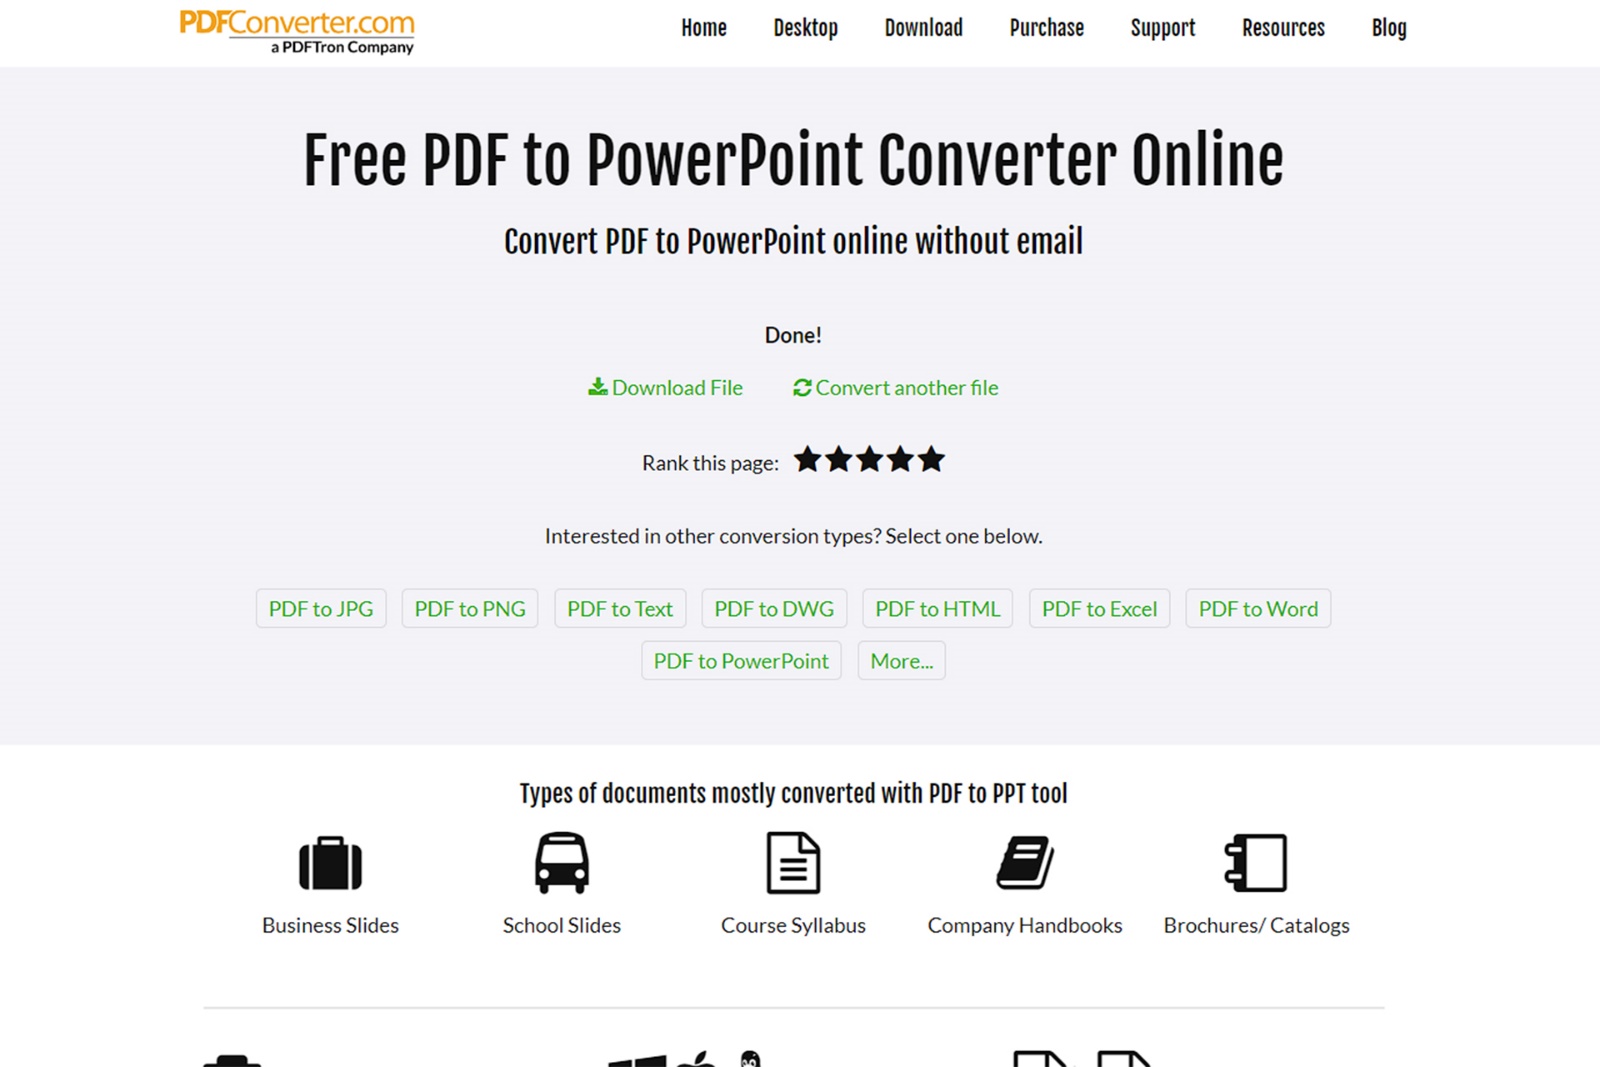 Completing the process of converting the PDF file to PowerPoint